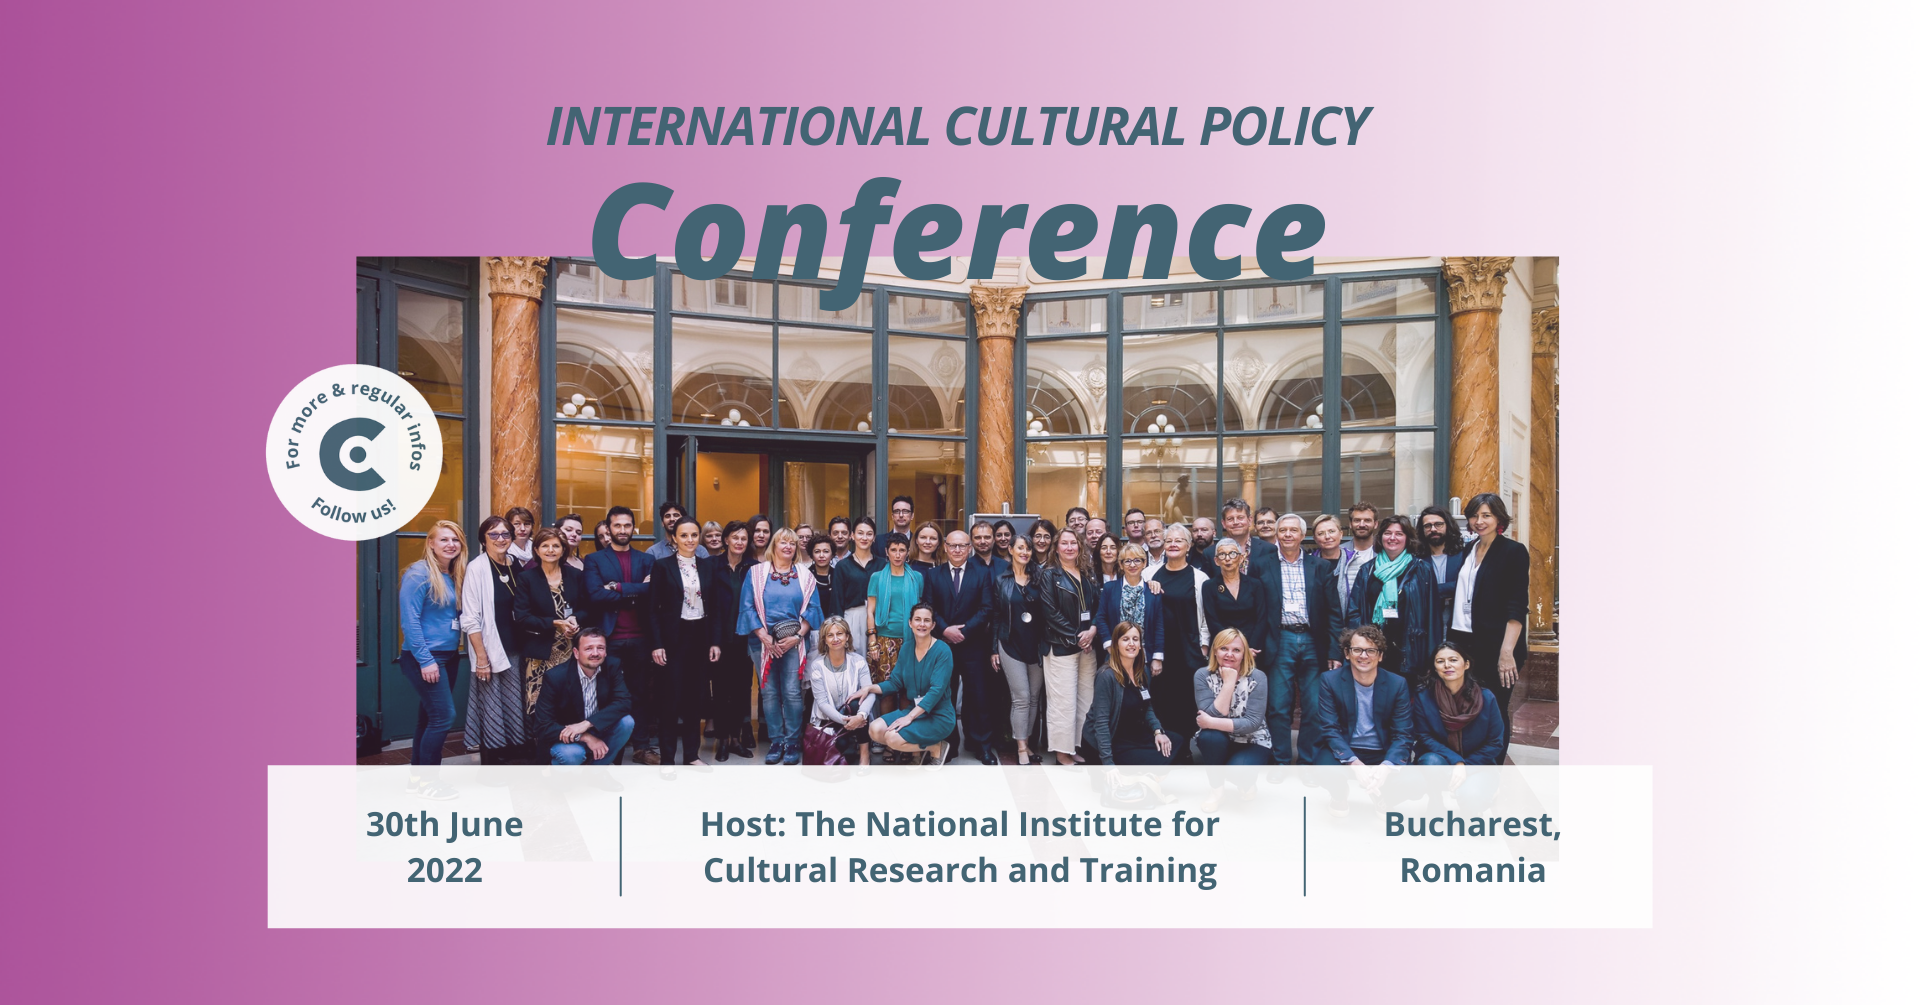 Image of International Cultural Policy Conference advertising banner